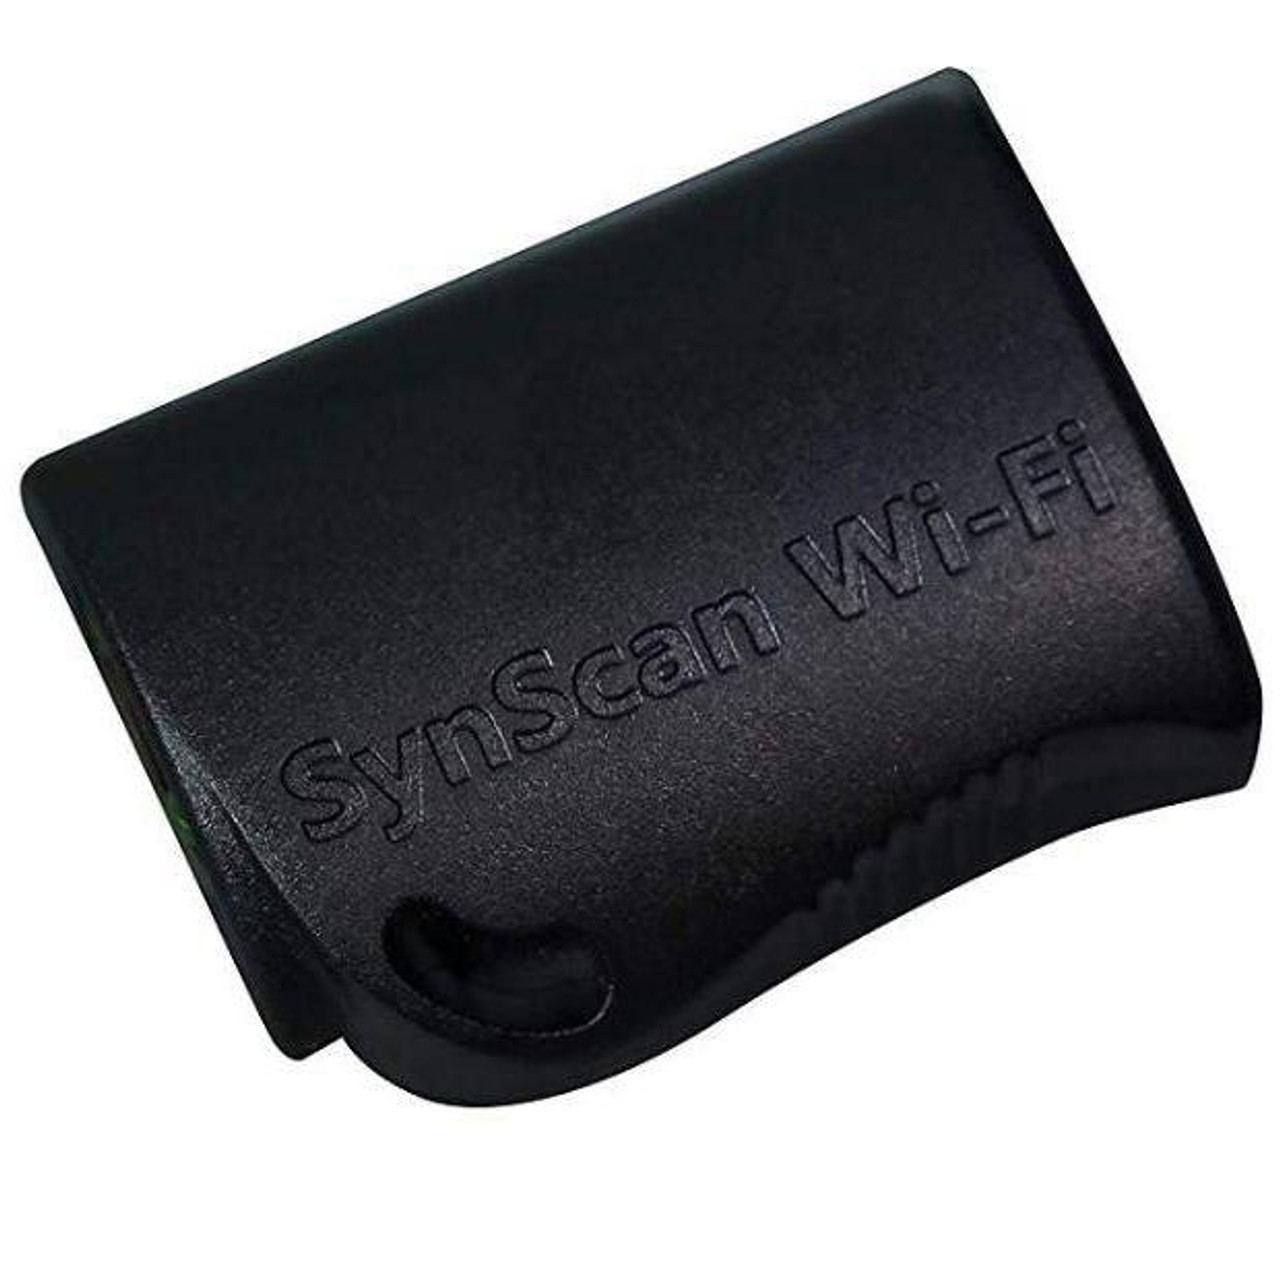 Sky-Watcher SynScan GPS Module for Easy Telescope Alignment Via GPS  (S30104)